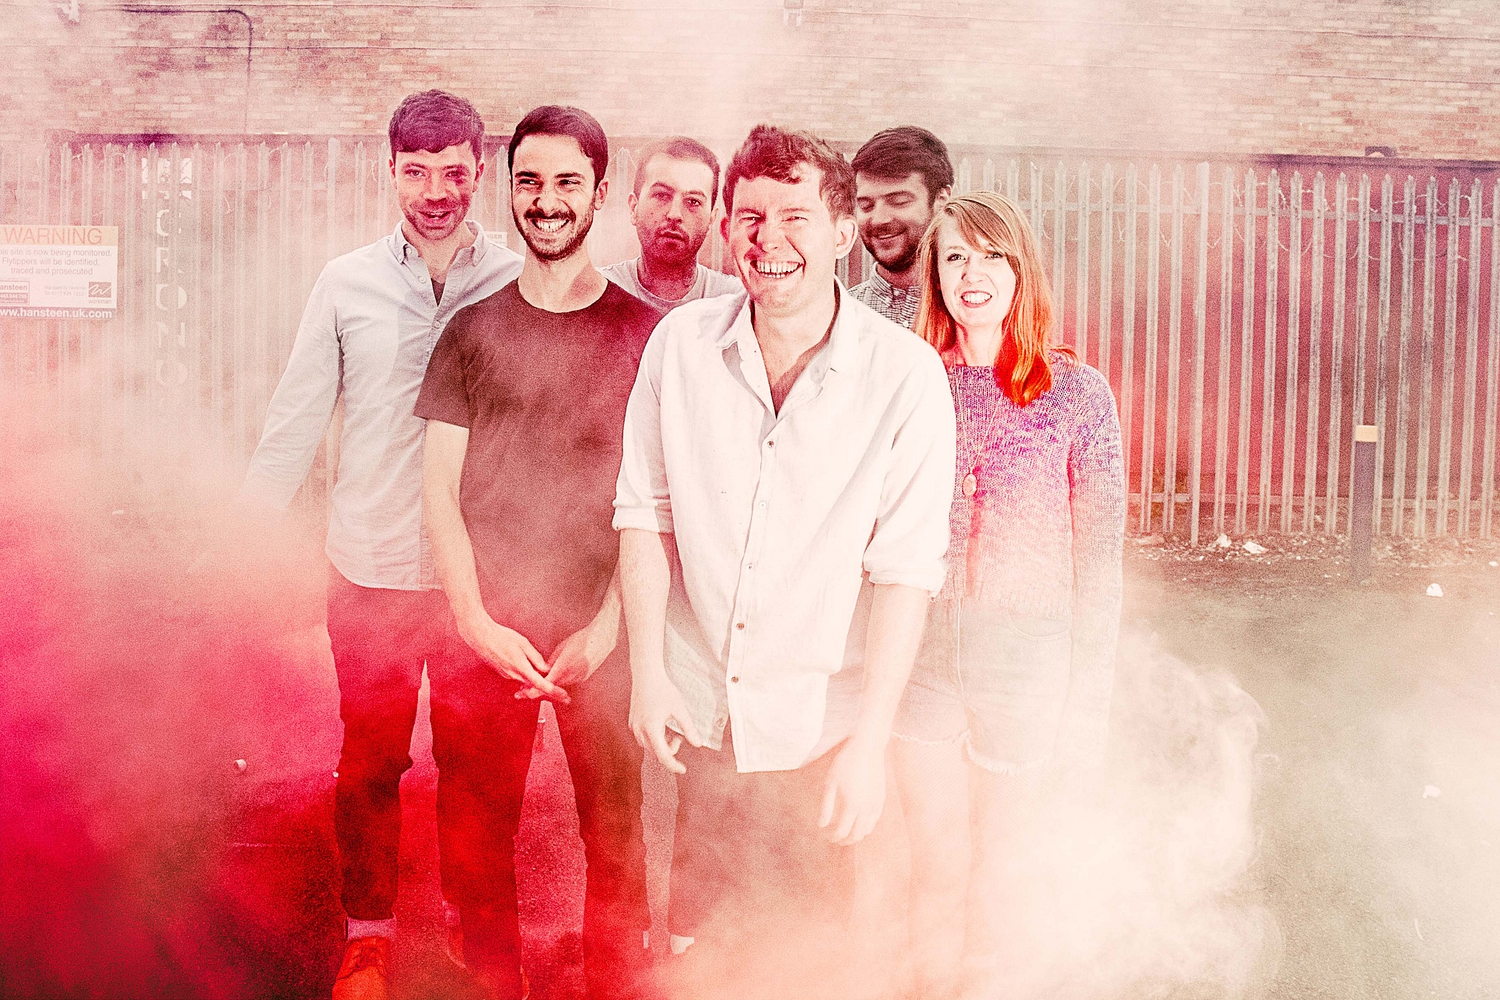 Win tickets for Los Campesinos! at Dr. Martens’ #STANDFORSOMETHING Tour in association with DIY